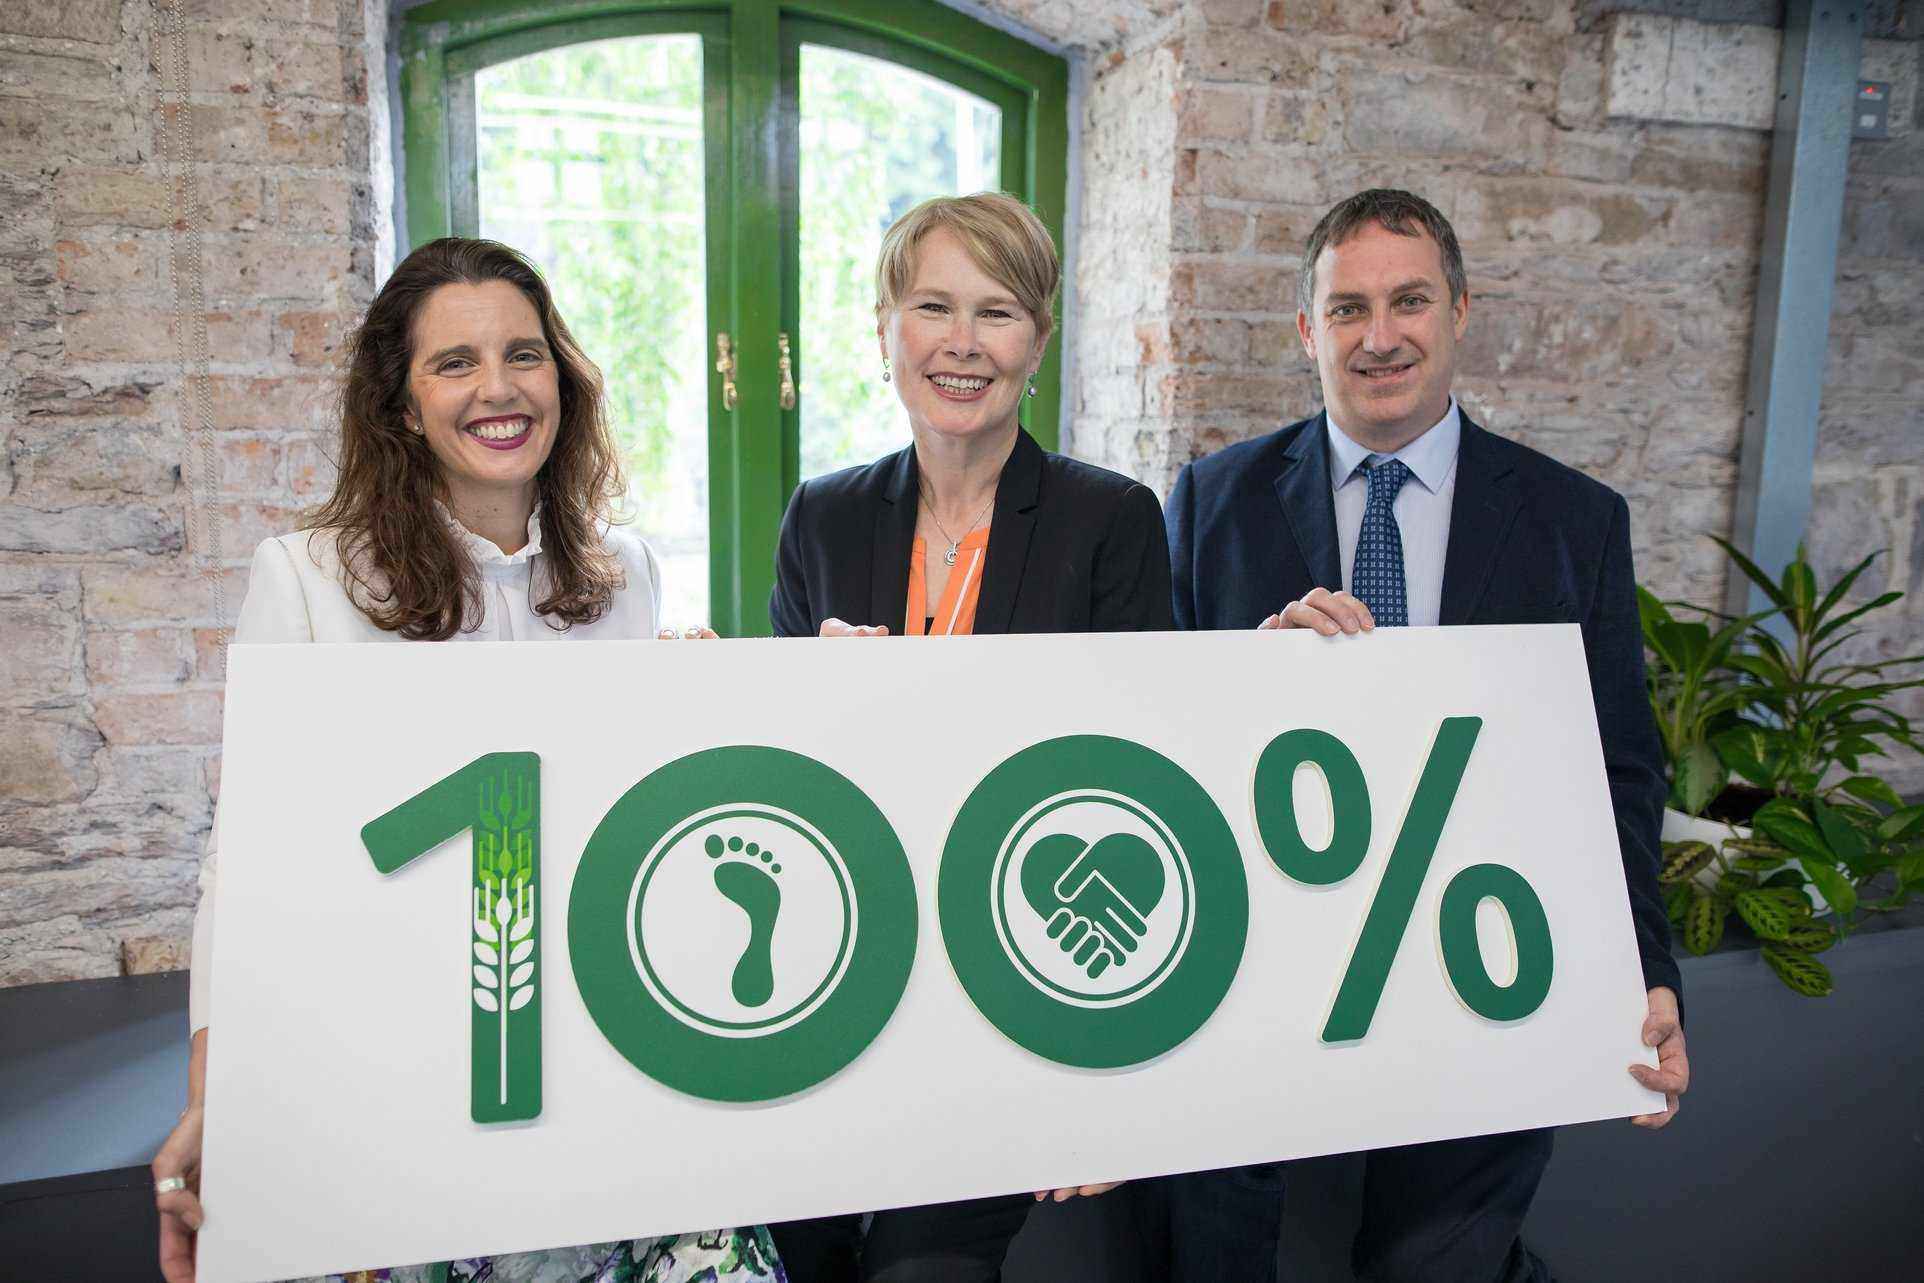 Launching Heineken Ireland’s 2016 Sustainability Report were (from left): Sandy Boundy, Communications and CSR manager; Managing Director Maggie Timoney and PJ Tierney, Brewery Operations Manager.